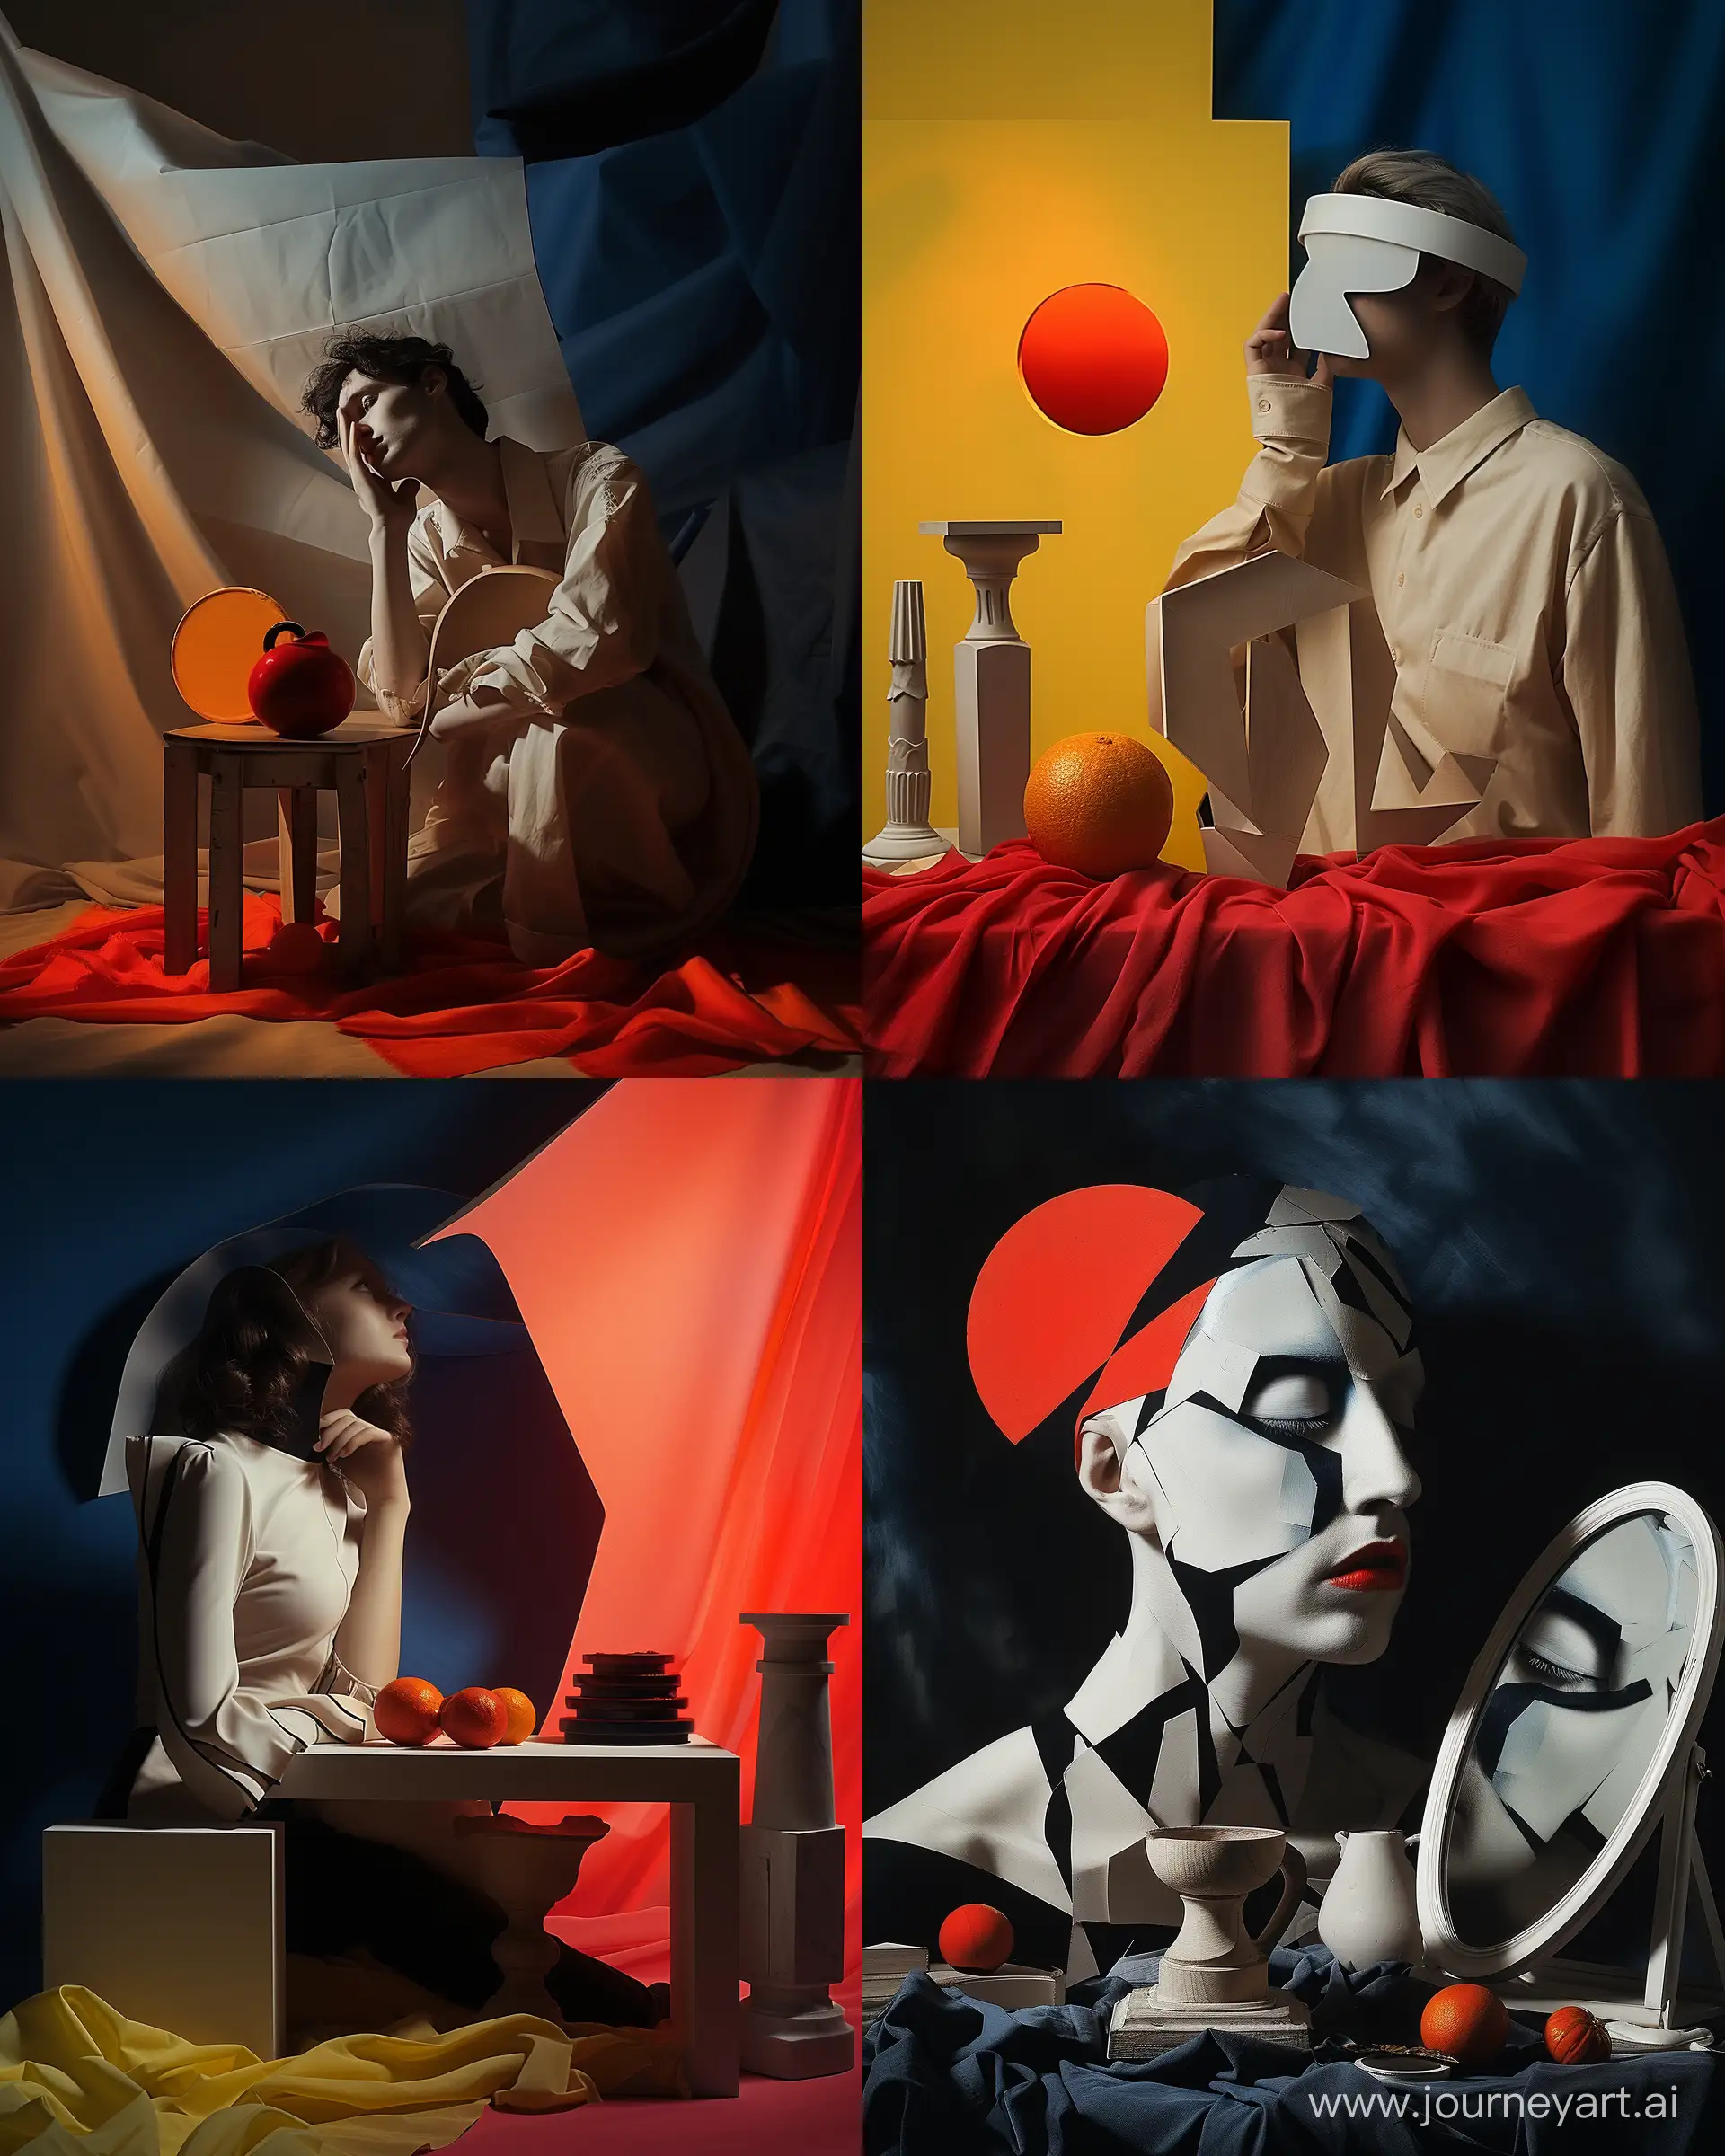 https://i.postimg.cc/Bbqp3082/d1c5942b-a4b4-4bcb-ae56-7a3bb6bbd83e.png , staged photography in style of cubism, picasso --ar 4:5